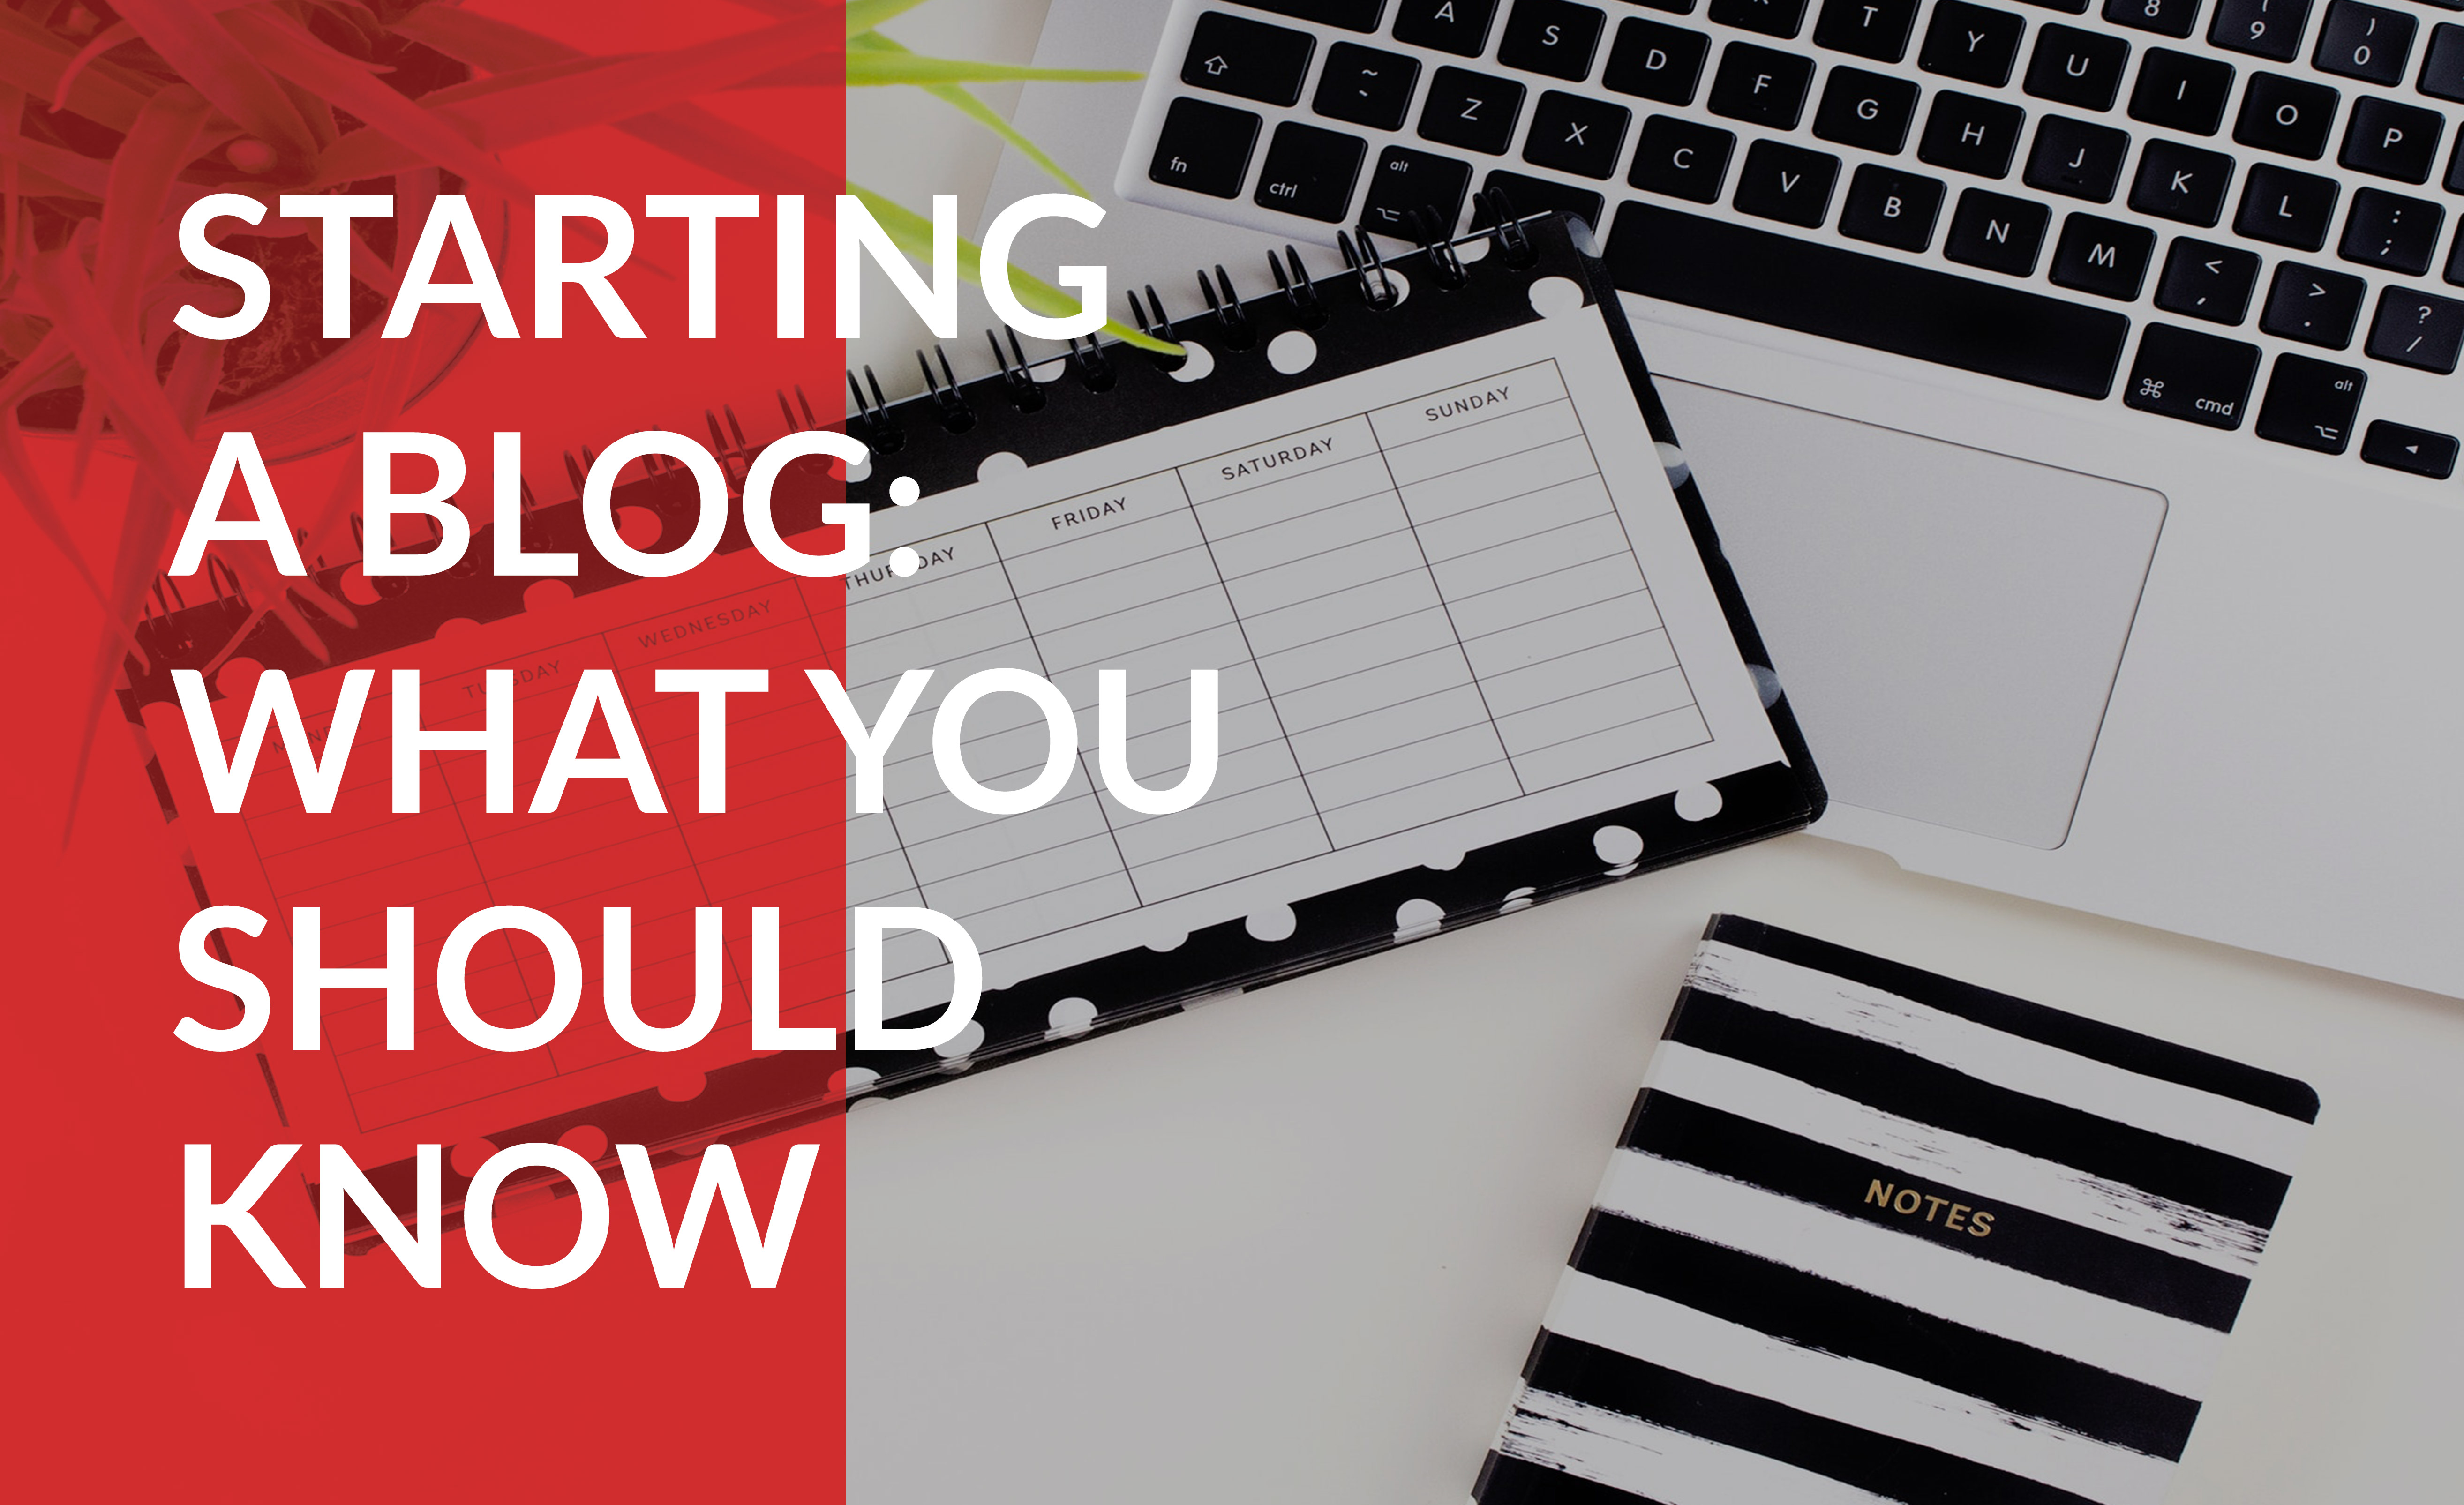 Starting a blog: What you should know